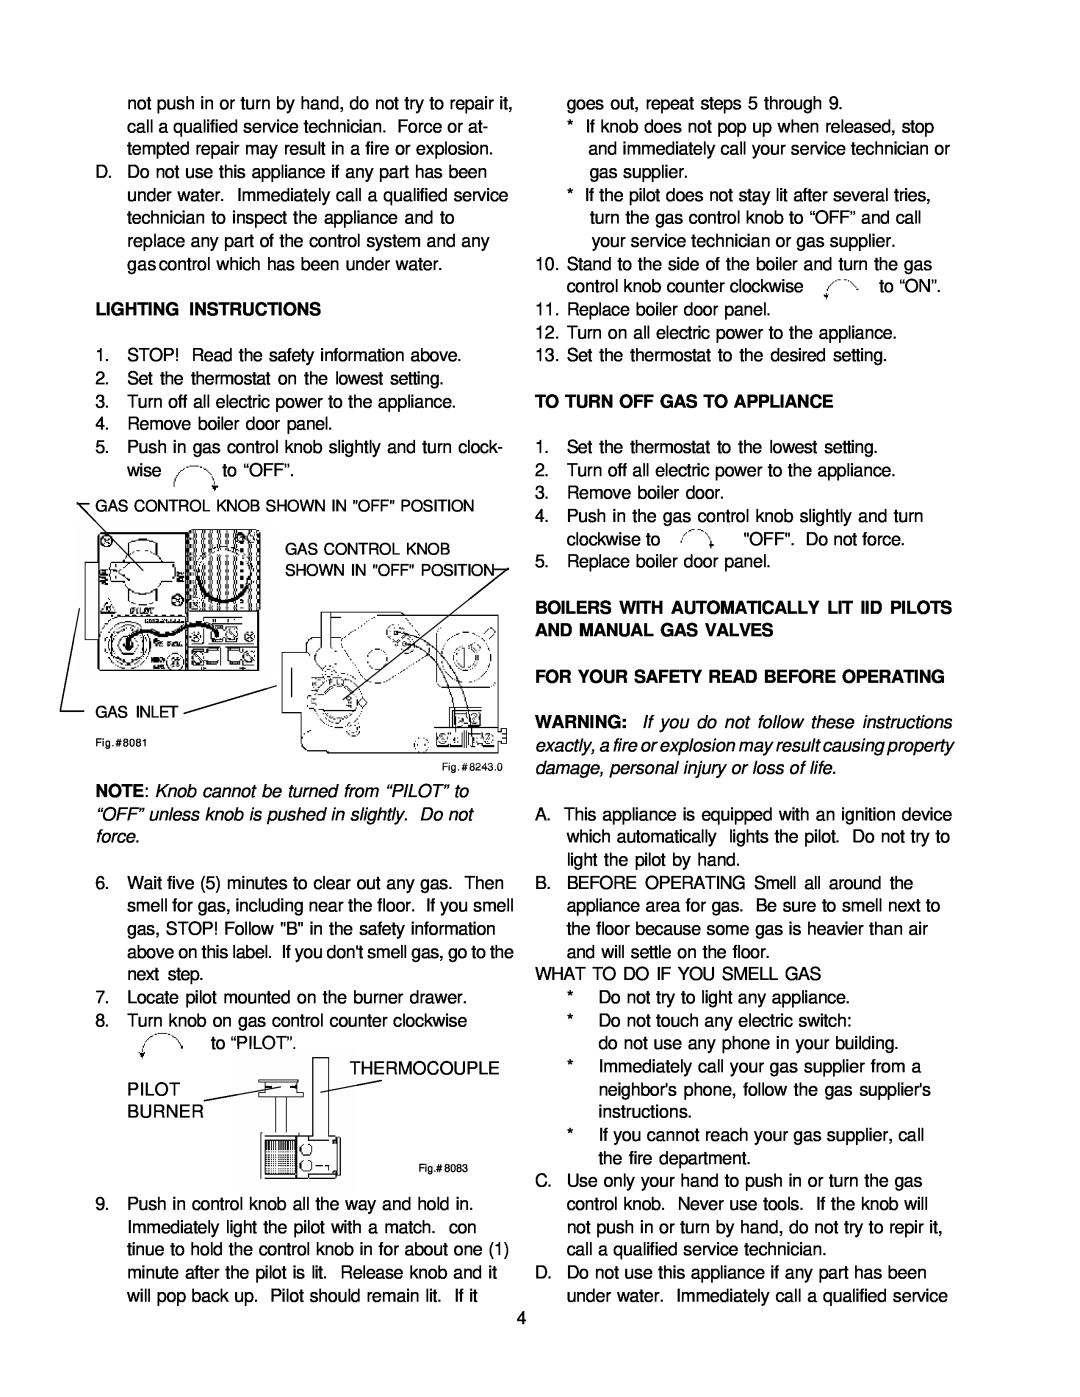 Raypak Gas Fired Boiler manual To Turn Off Gas To Appliance, Lighting Instructions, For Your Safety Read Before Operating 